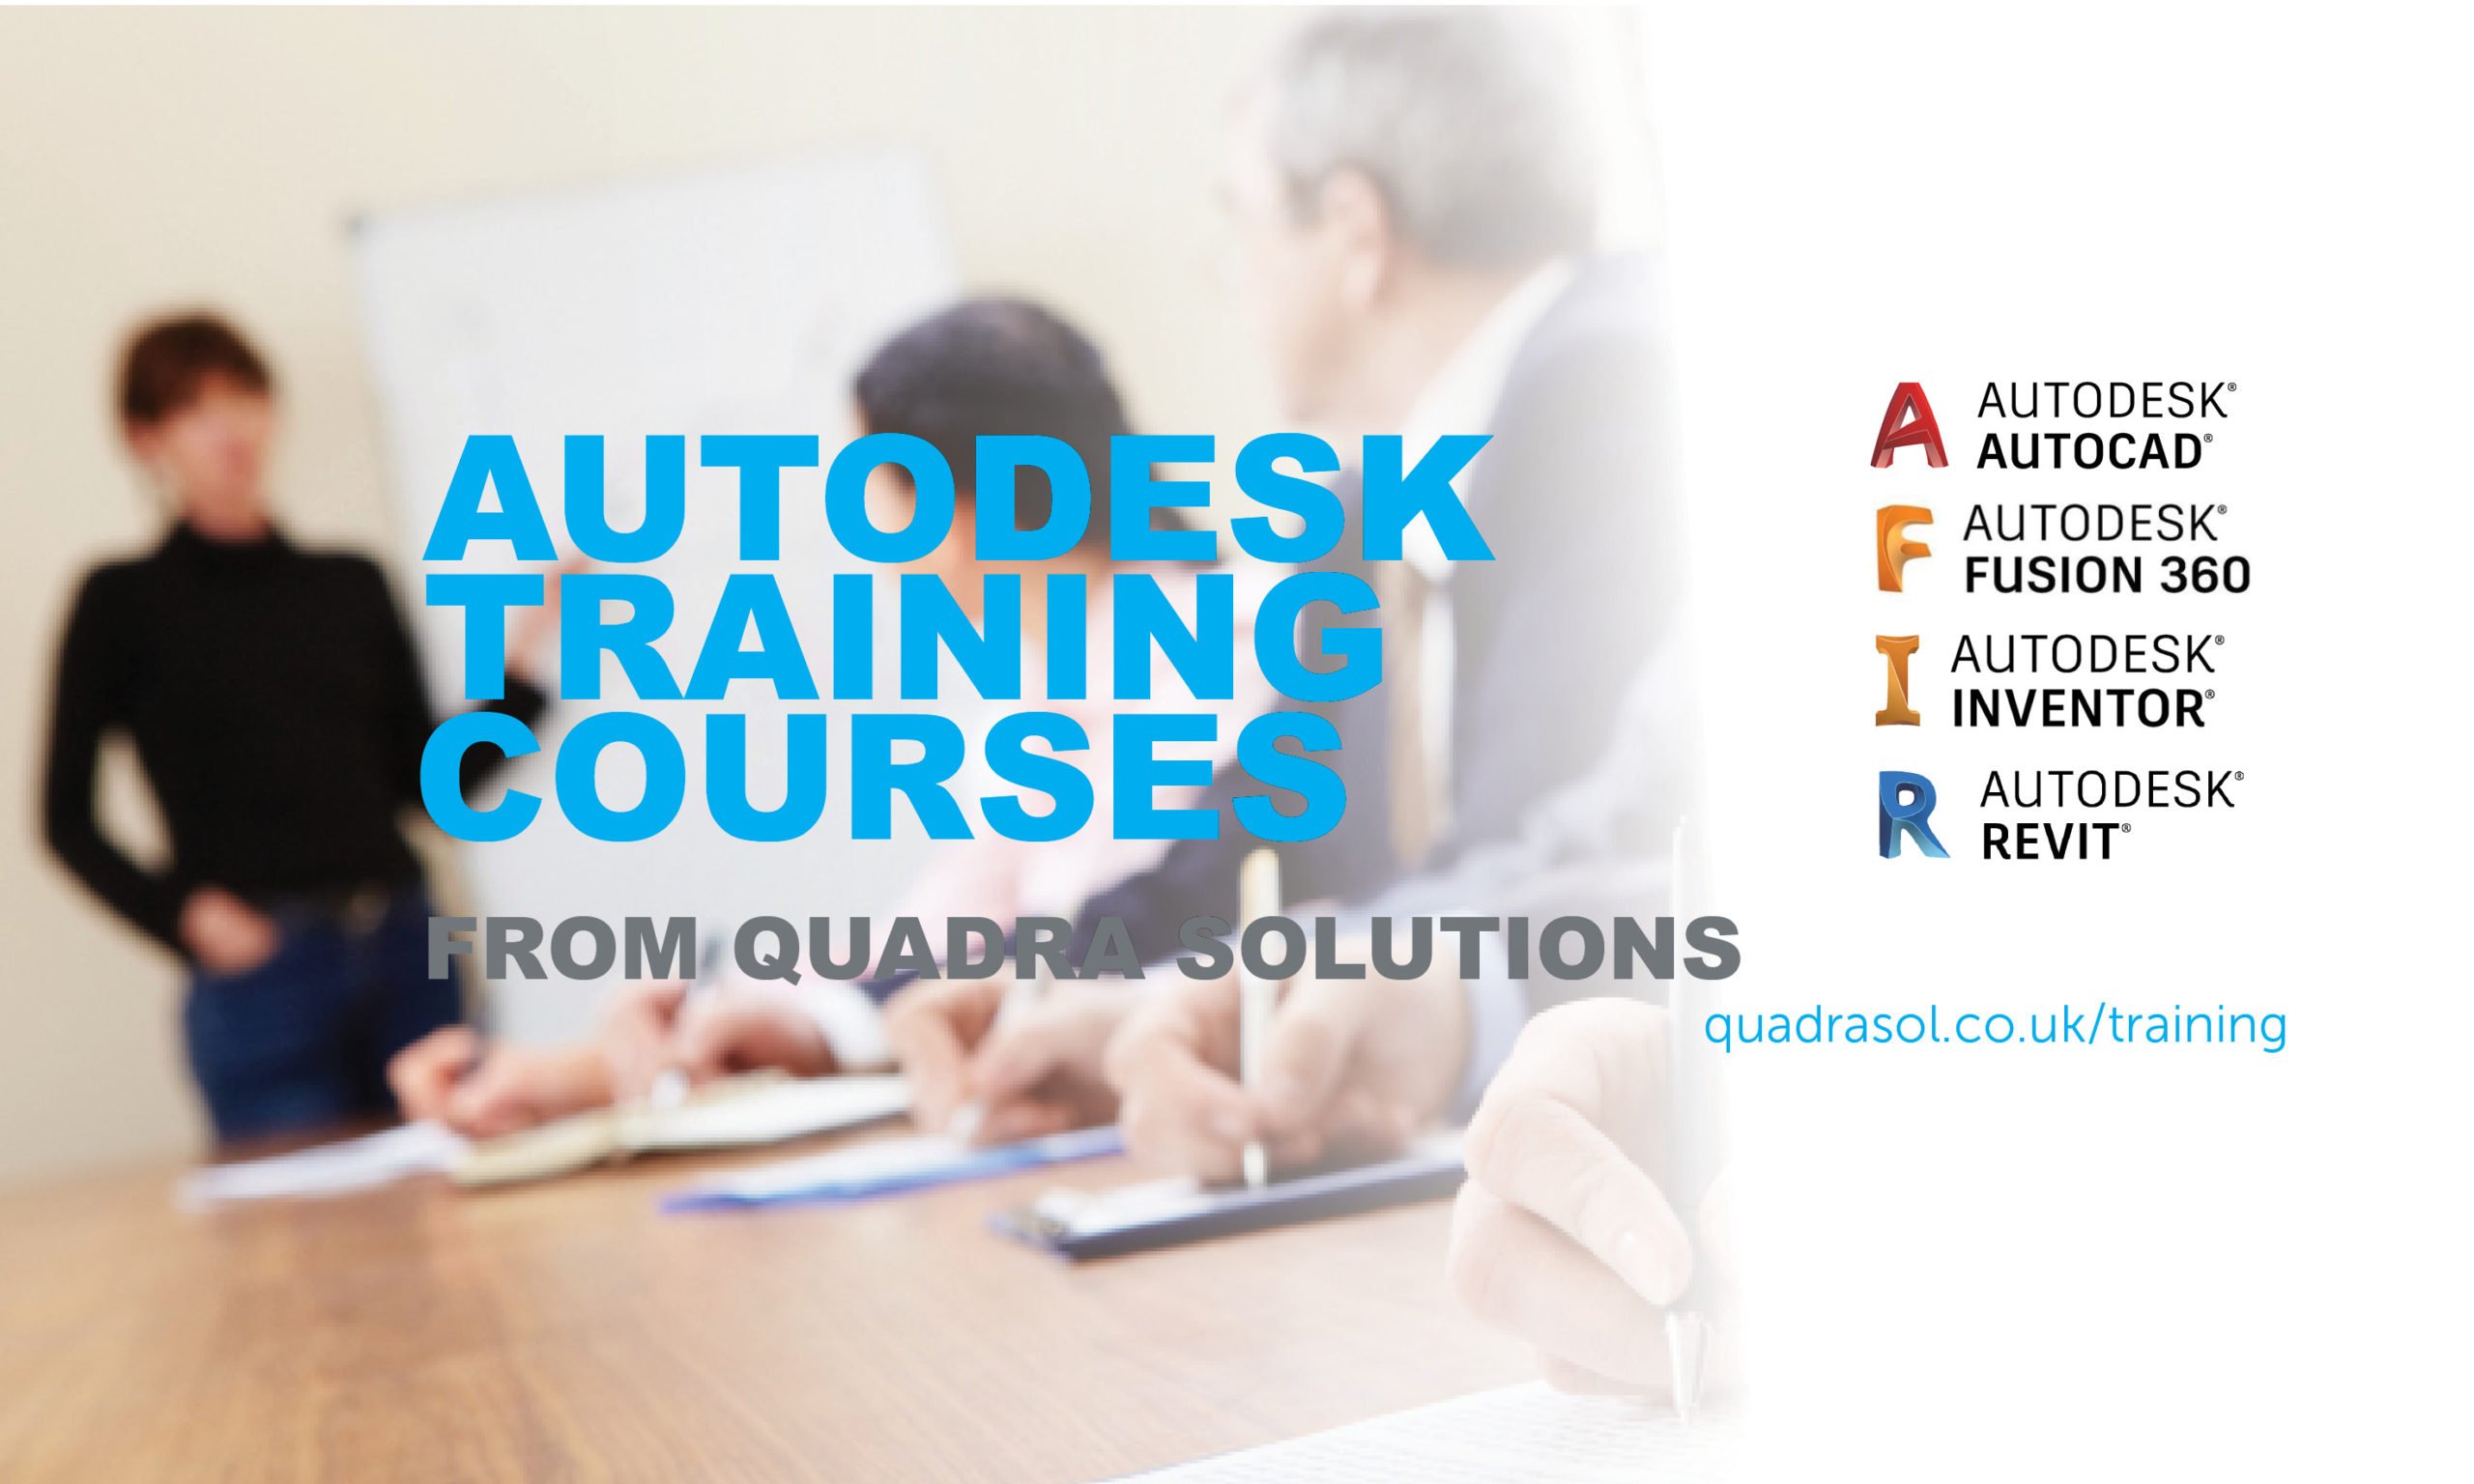 AutoCAD Design Training Courses You and Your Team Need Right Now